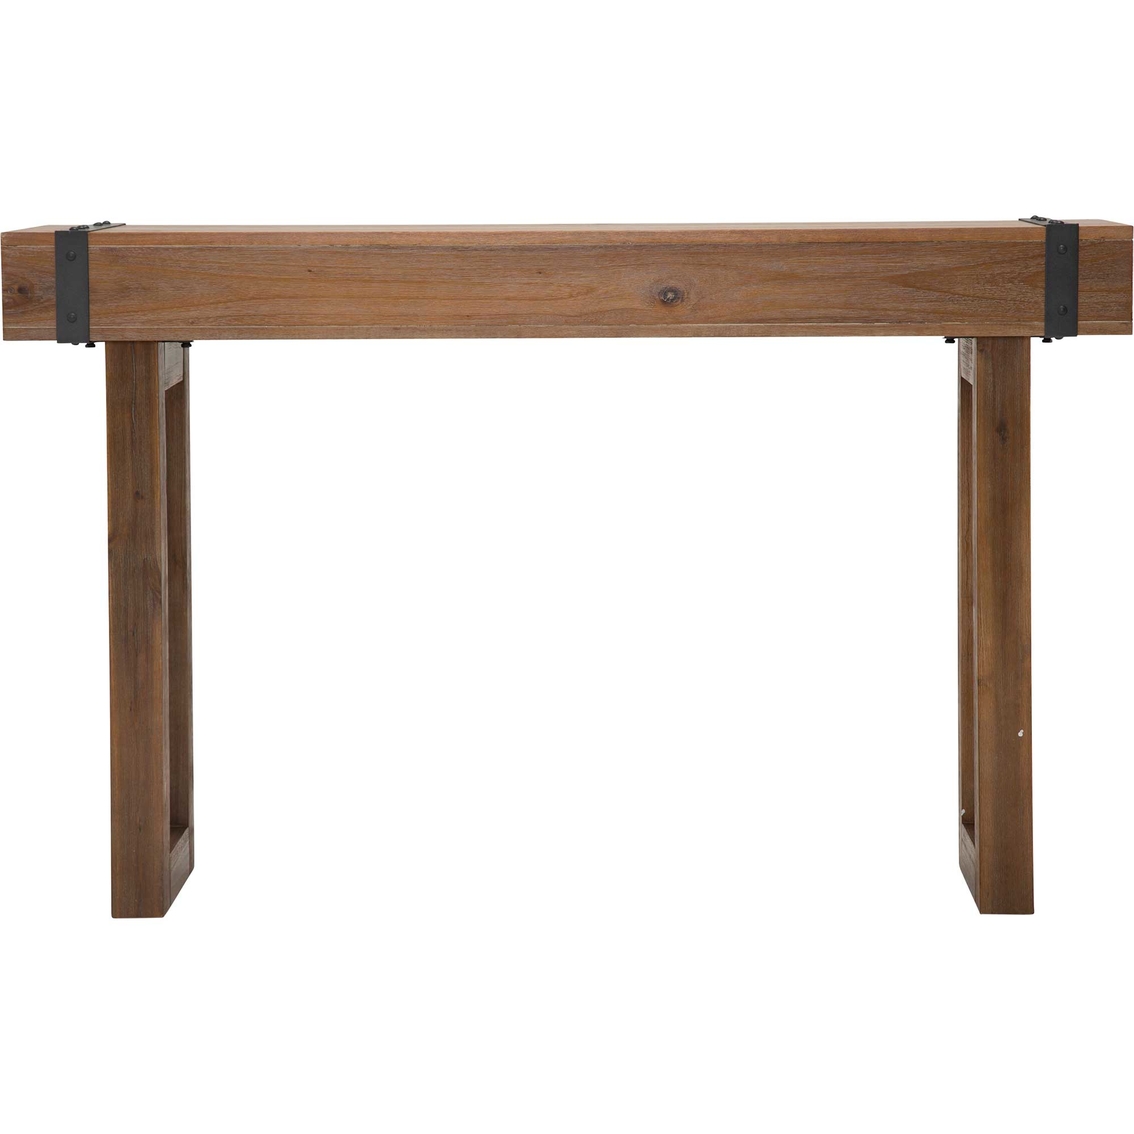 Kathy Ireland Home Brooklyn Walk Collection Console Table - Image 2 of 5